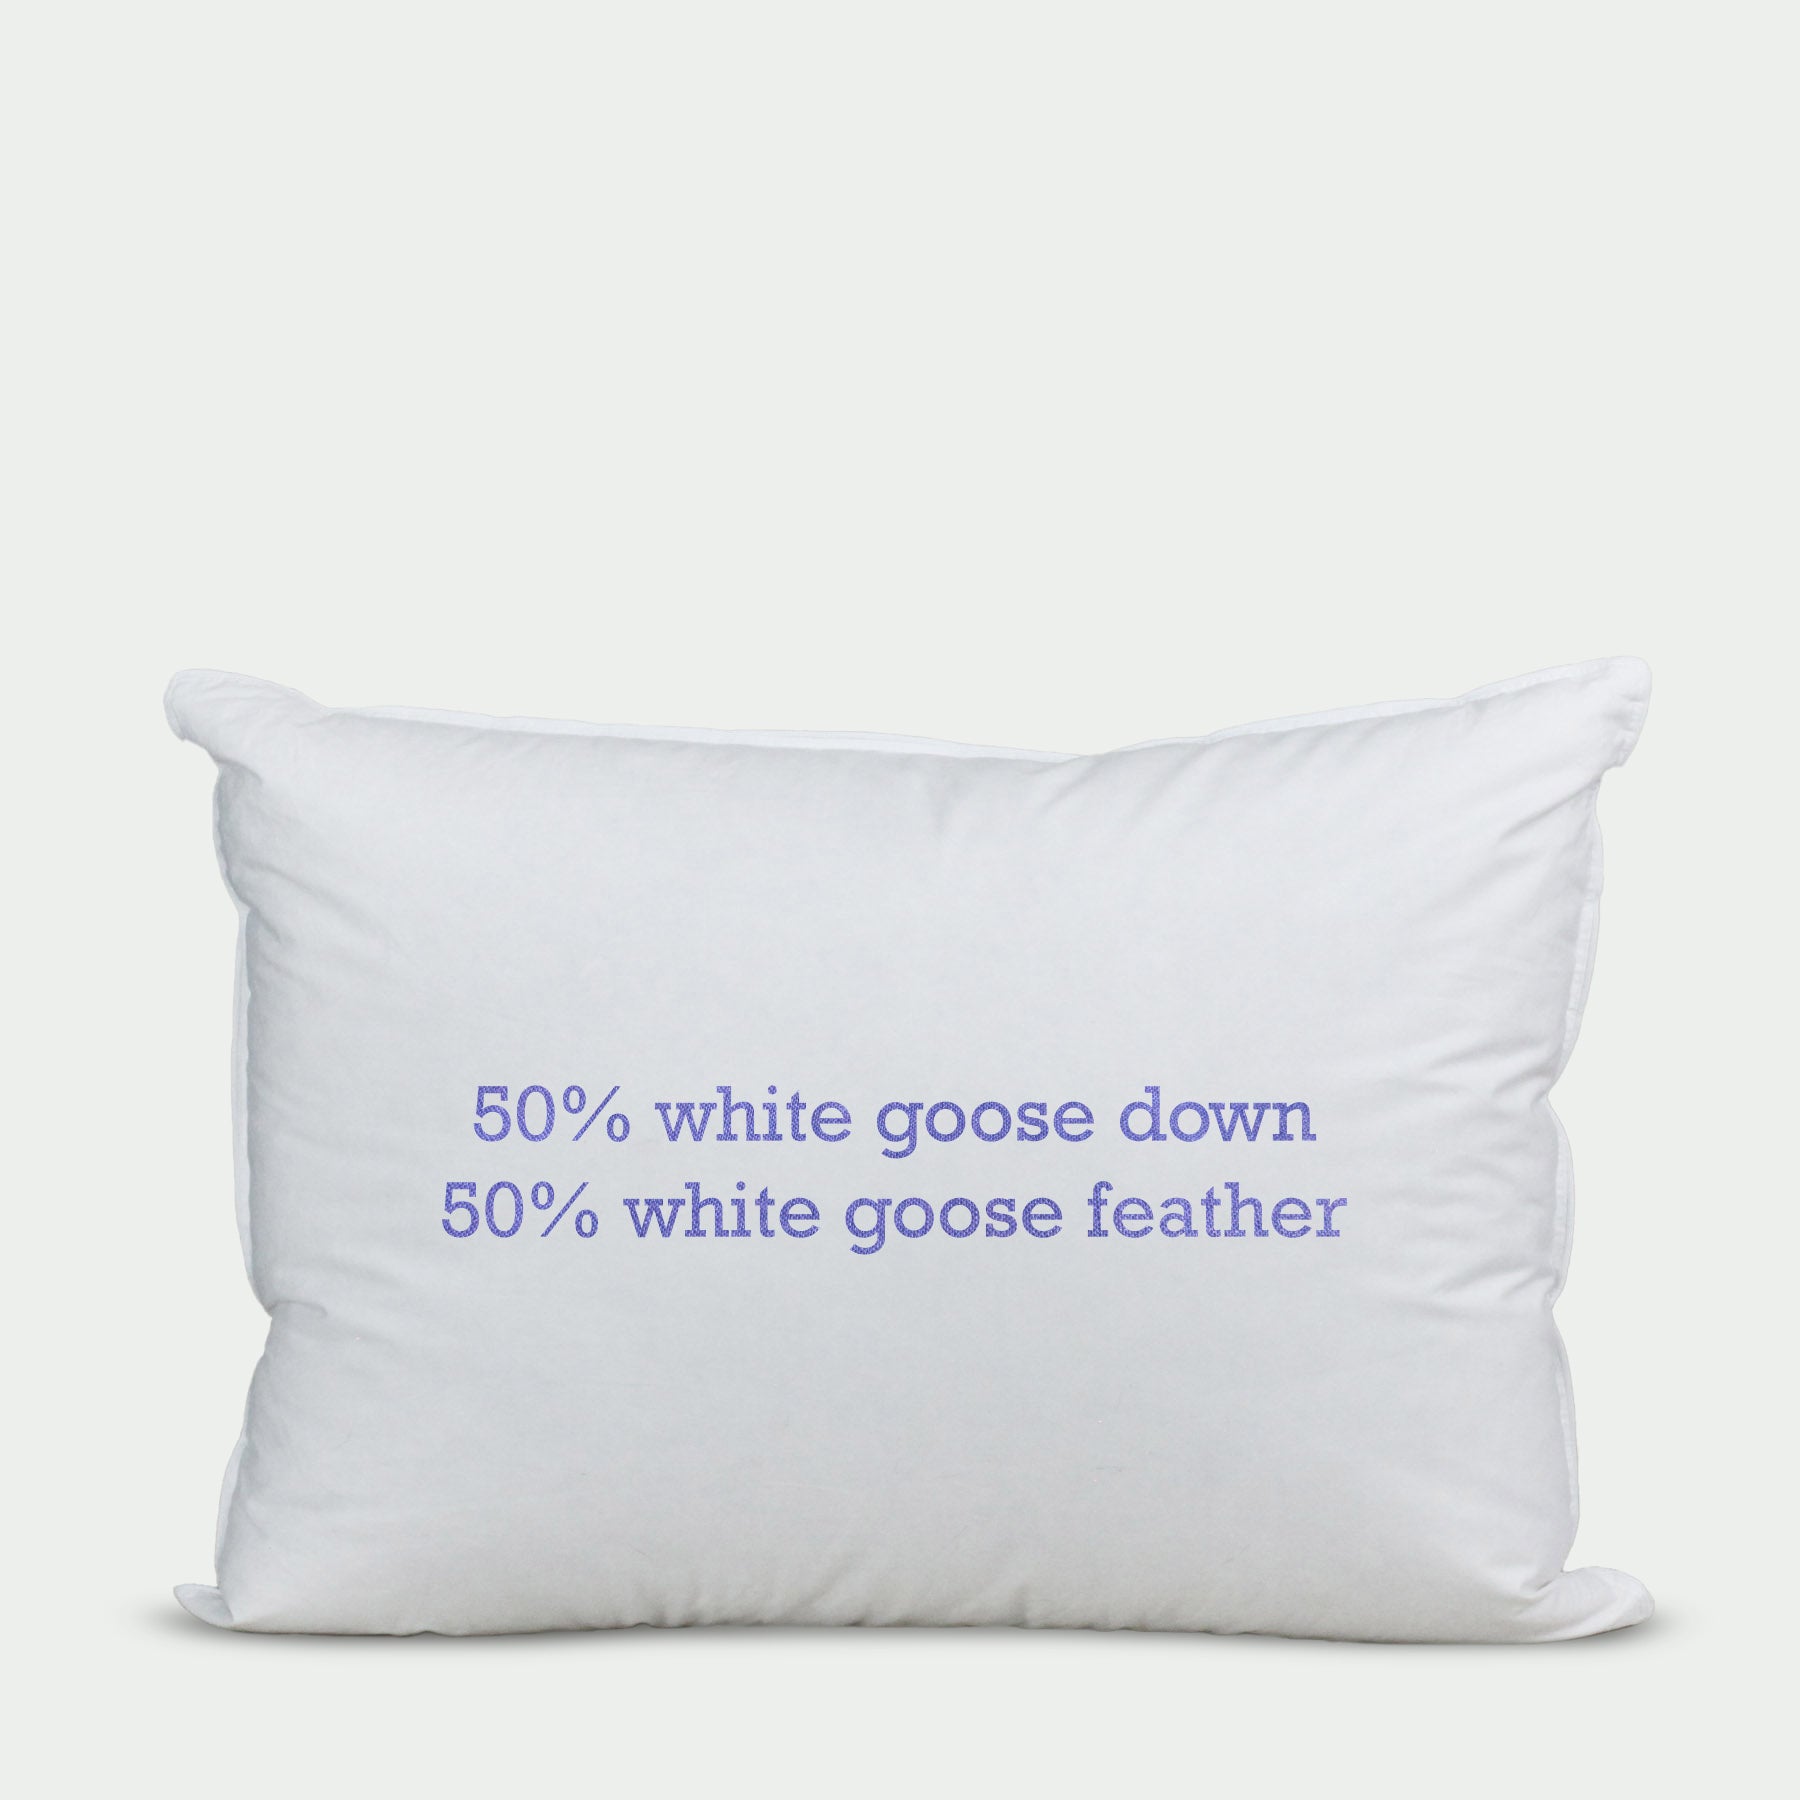 50/50 White Goose Down and Feather Pillow/ Pillows/ Down etc